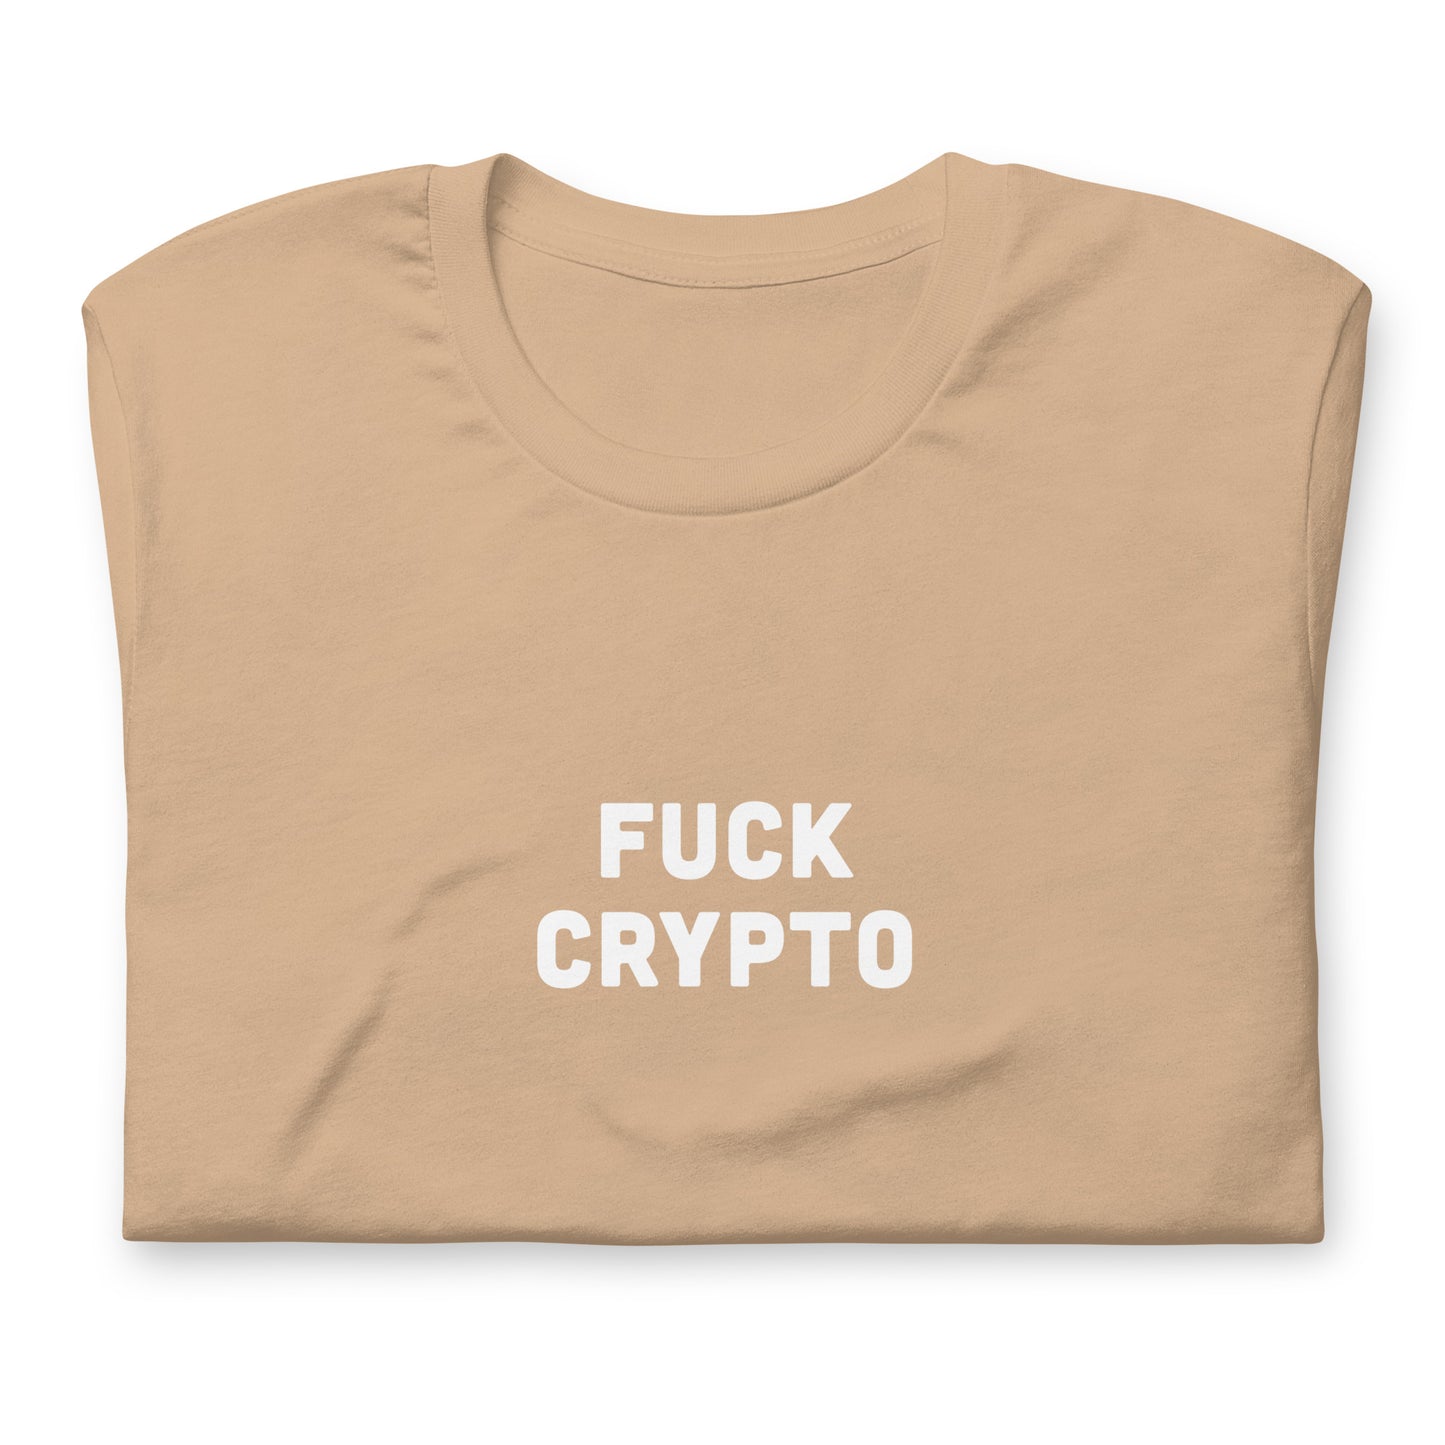 Fuck Crypto T-Shirt Size XL Color Forest